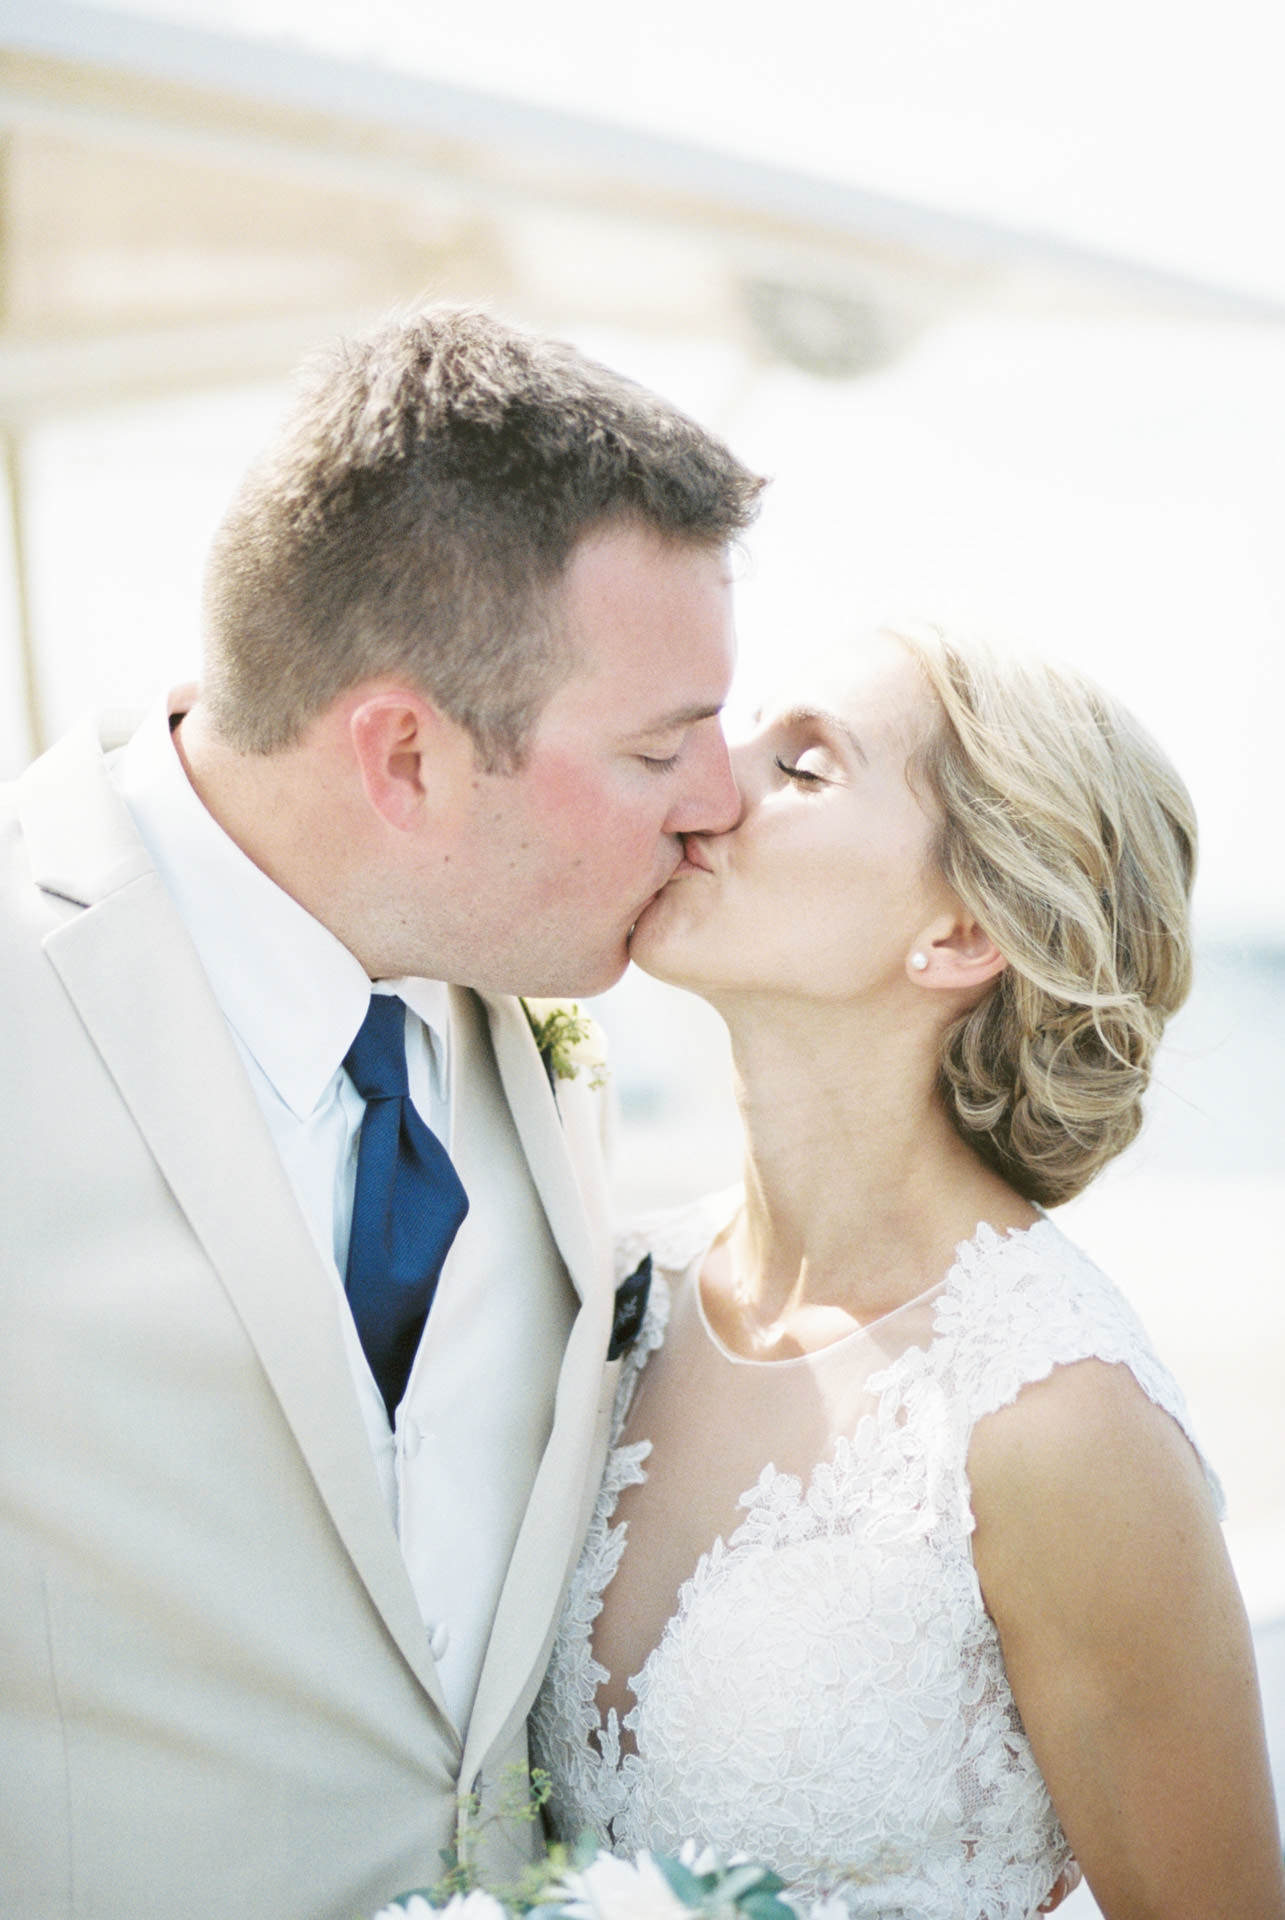 Bride and Groom kissing at their Cape Cod wedding at The Coonamessett Inn in Falmouth, MA